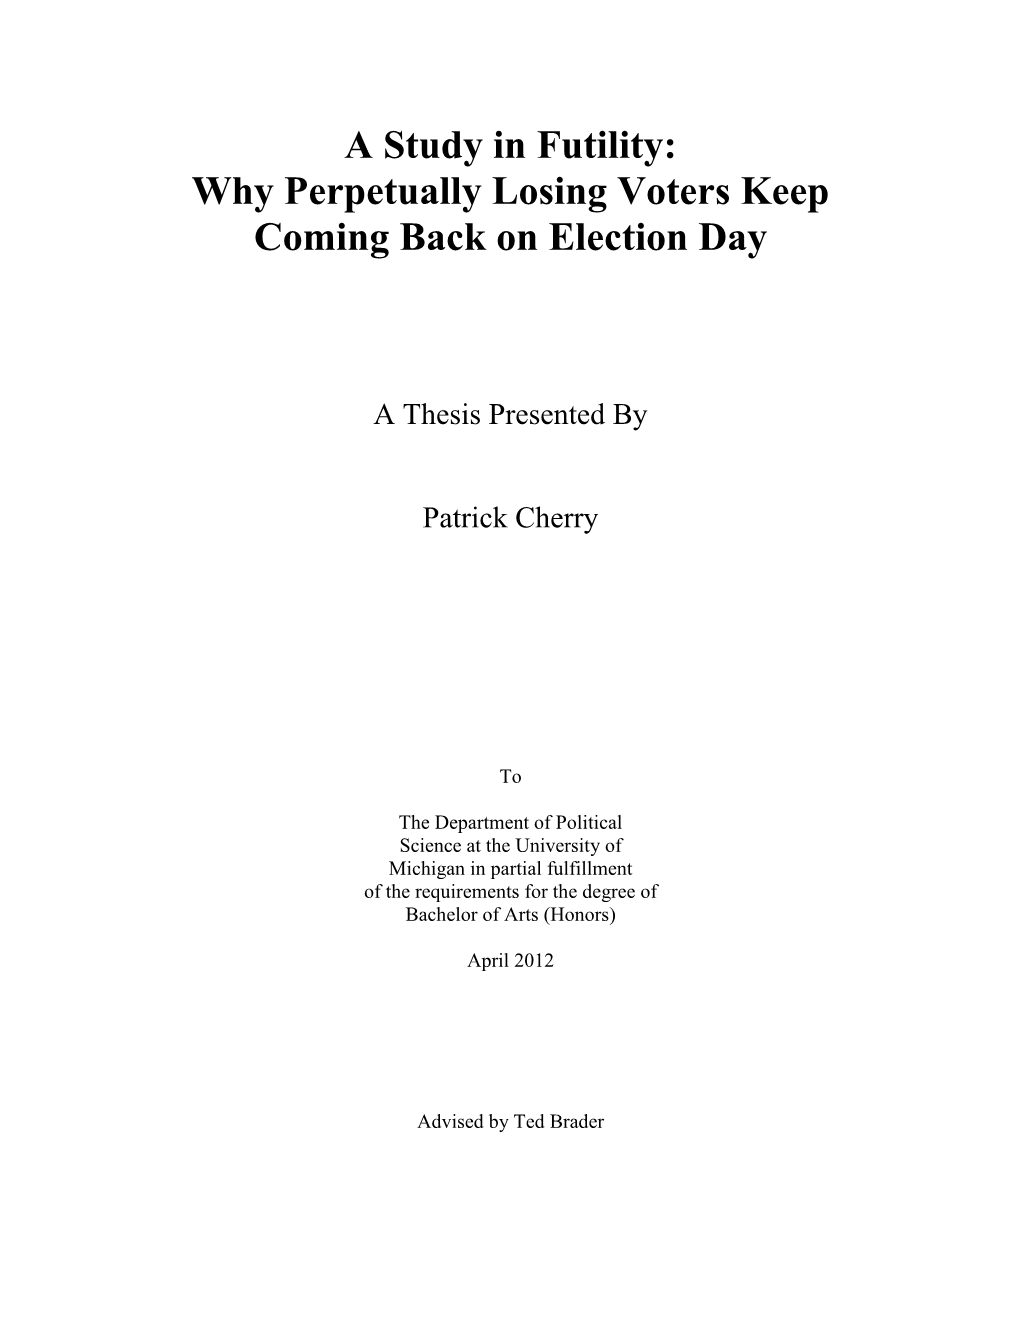 A Study in Futility: Why Perpetually Losing Voters Keep Coming Back on Election Day